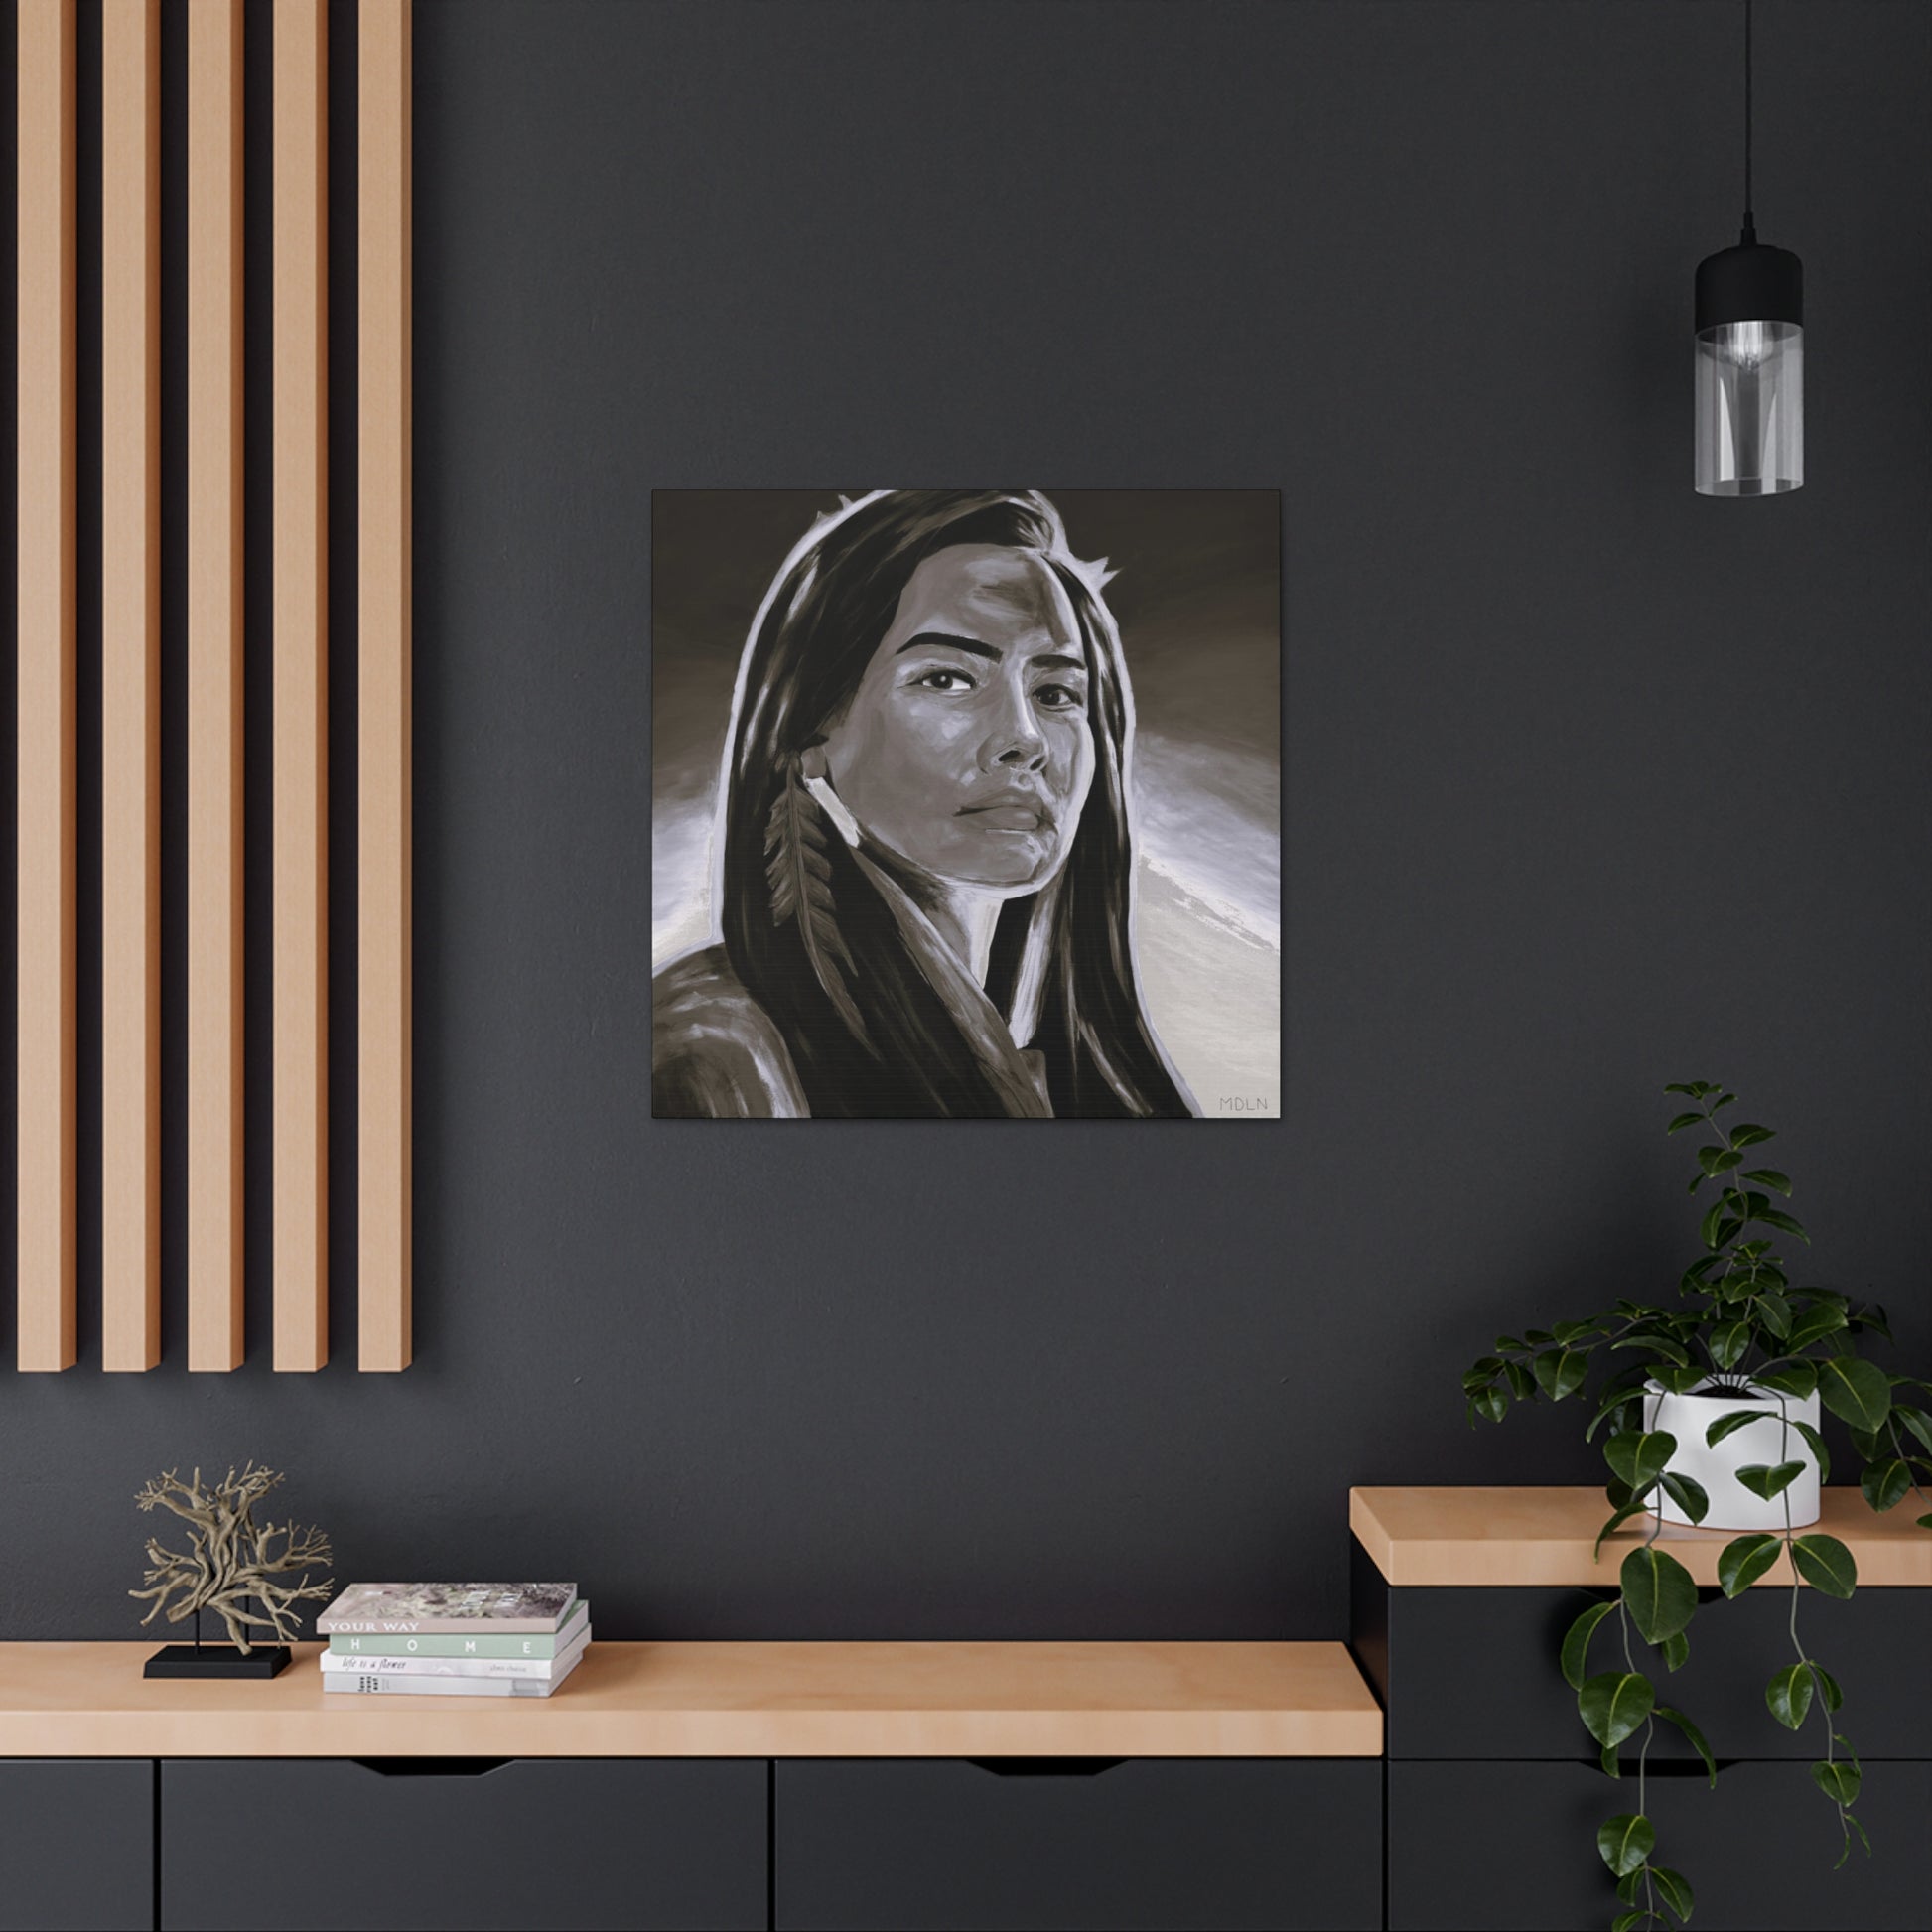 Black and white Indigenous art print on canvas of an Aboriginal Woman with a feather earring, hanging on the wall over a desk